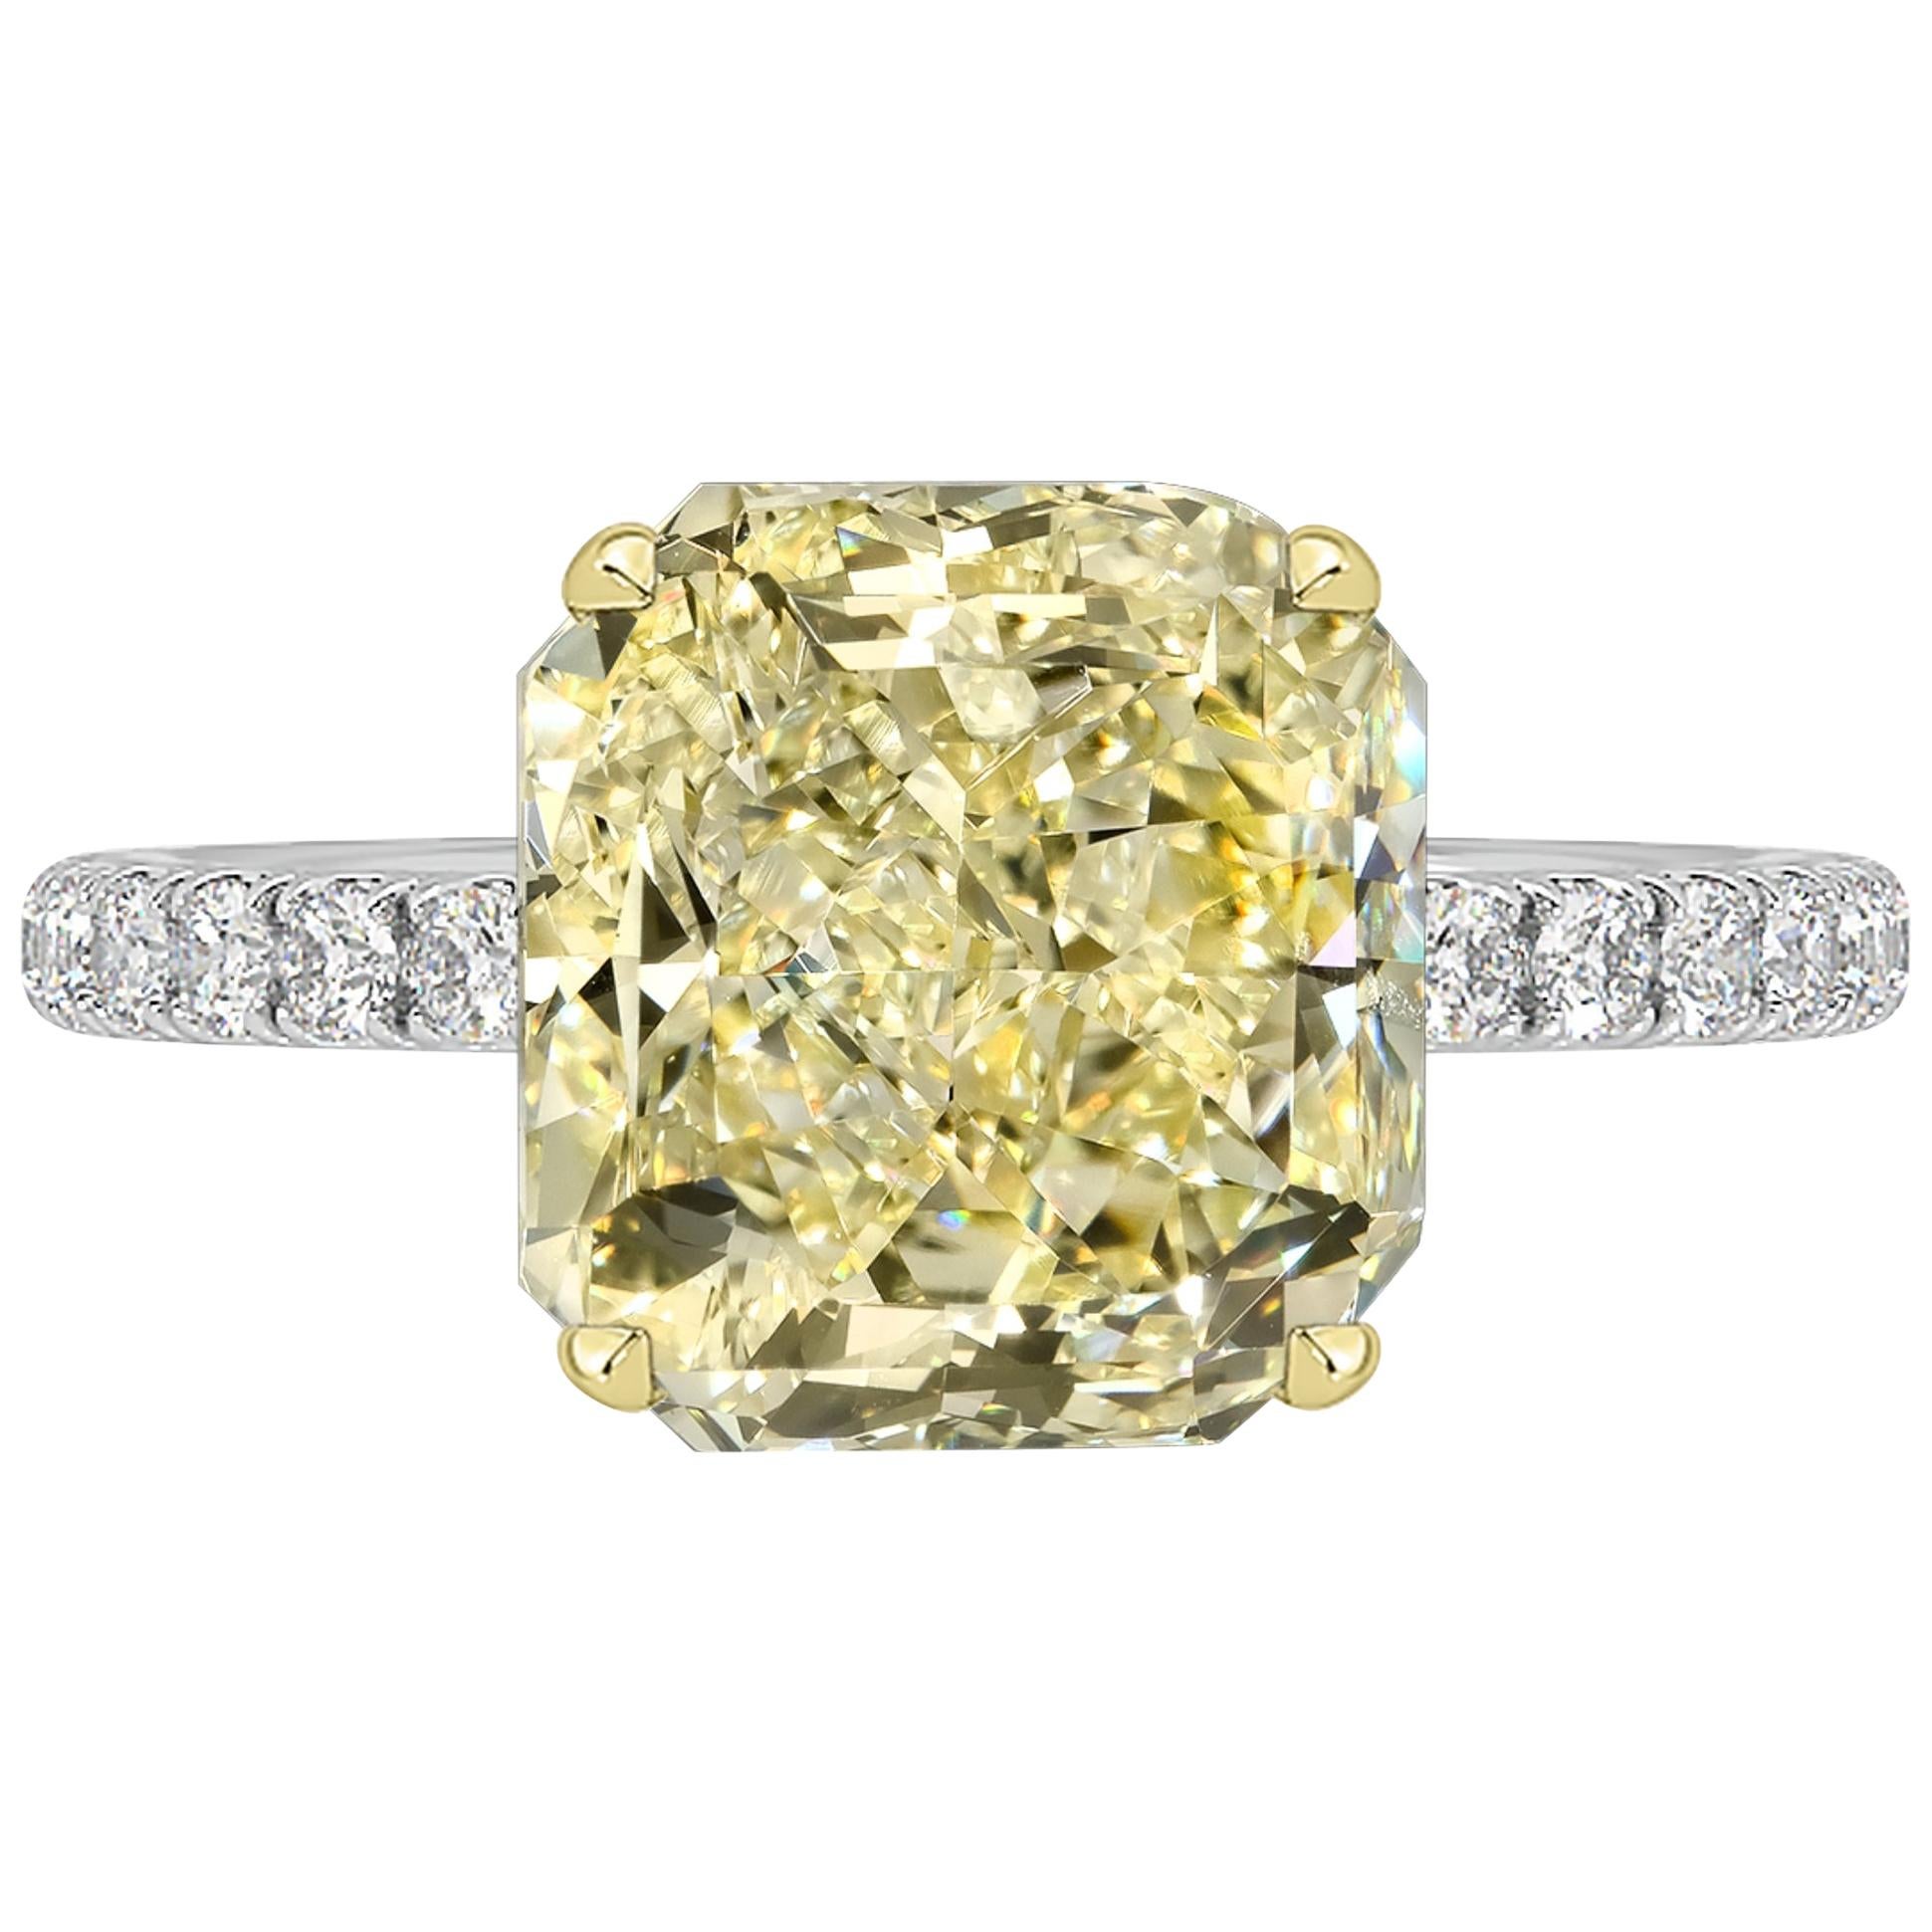 GIA Certified 3.01 Carat Radiant Cut Yellow Diamond Ring For Sale